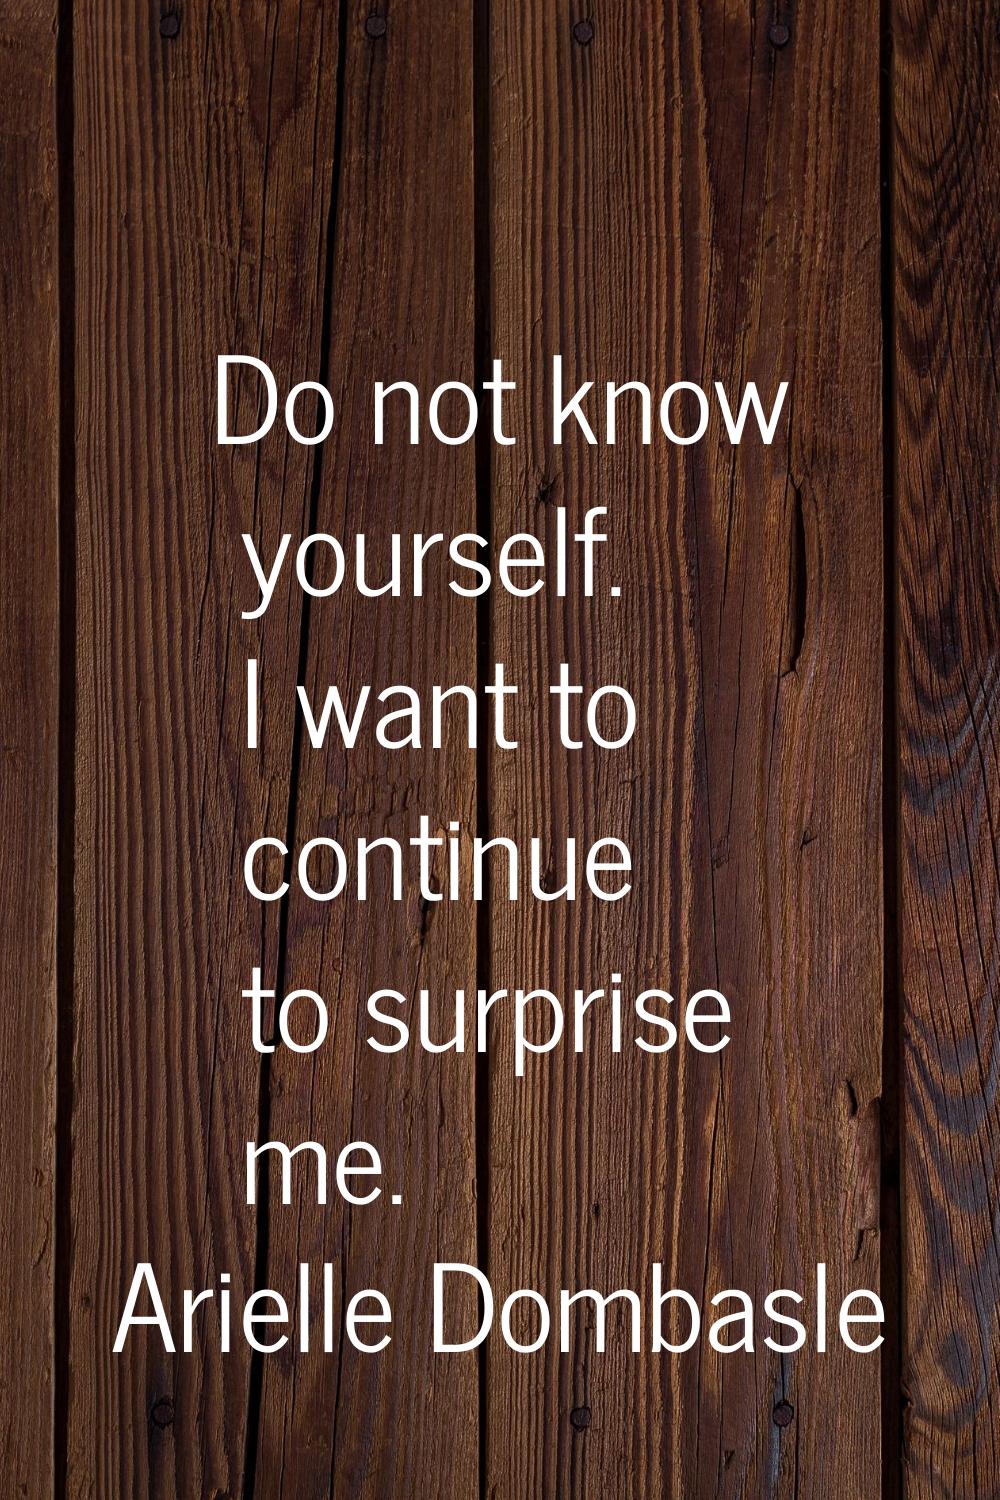 Do not know yourself. I want to continue to surprise me.